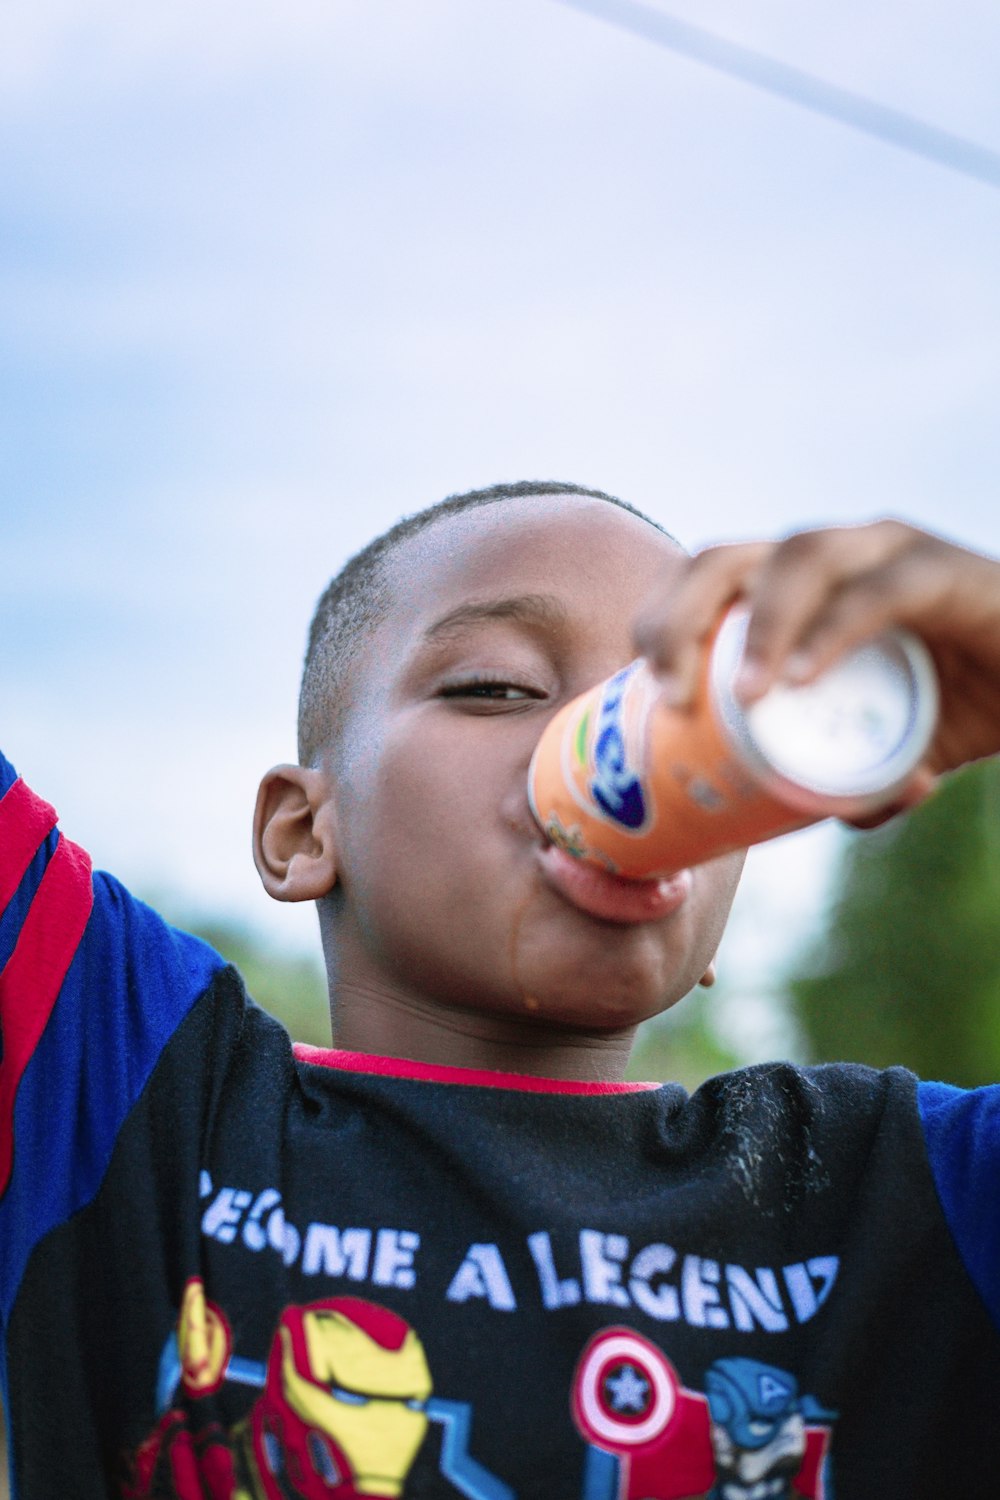 a young boy drinking a drink from a bottle